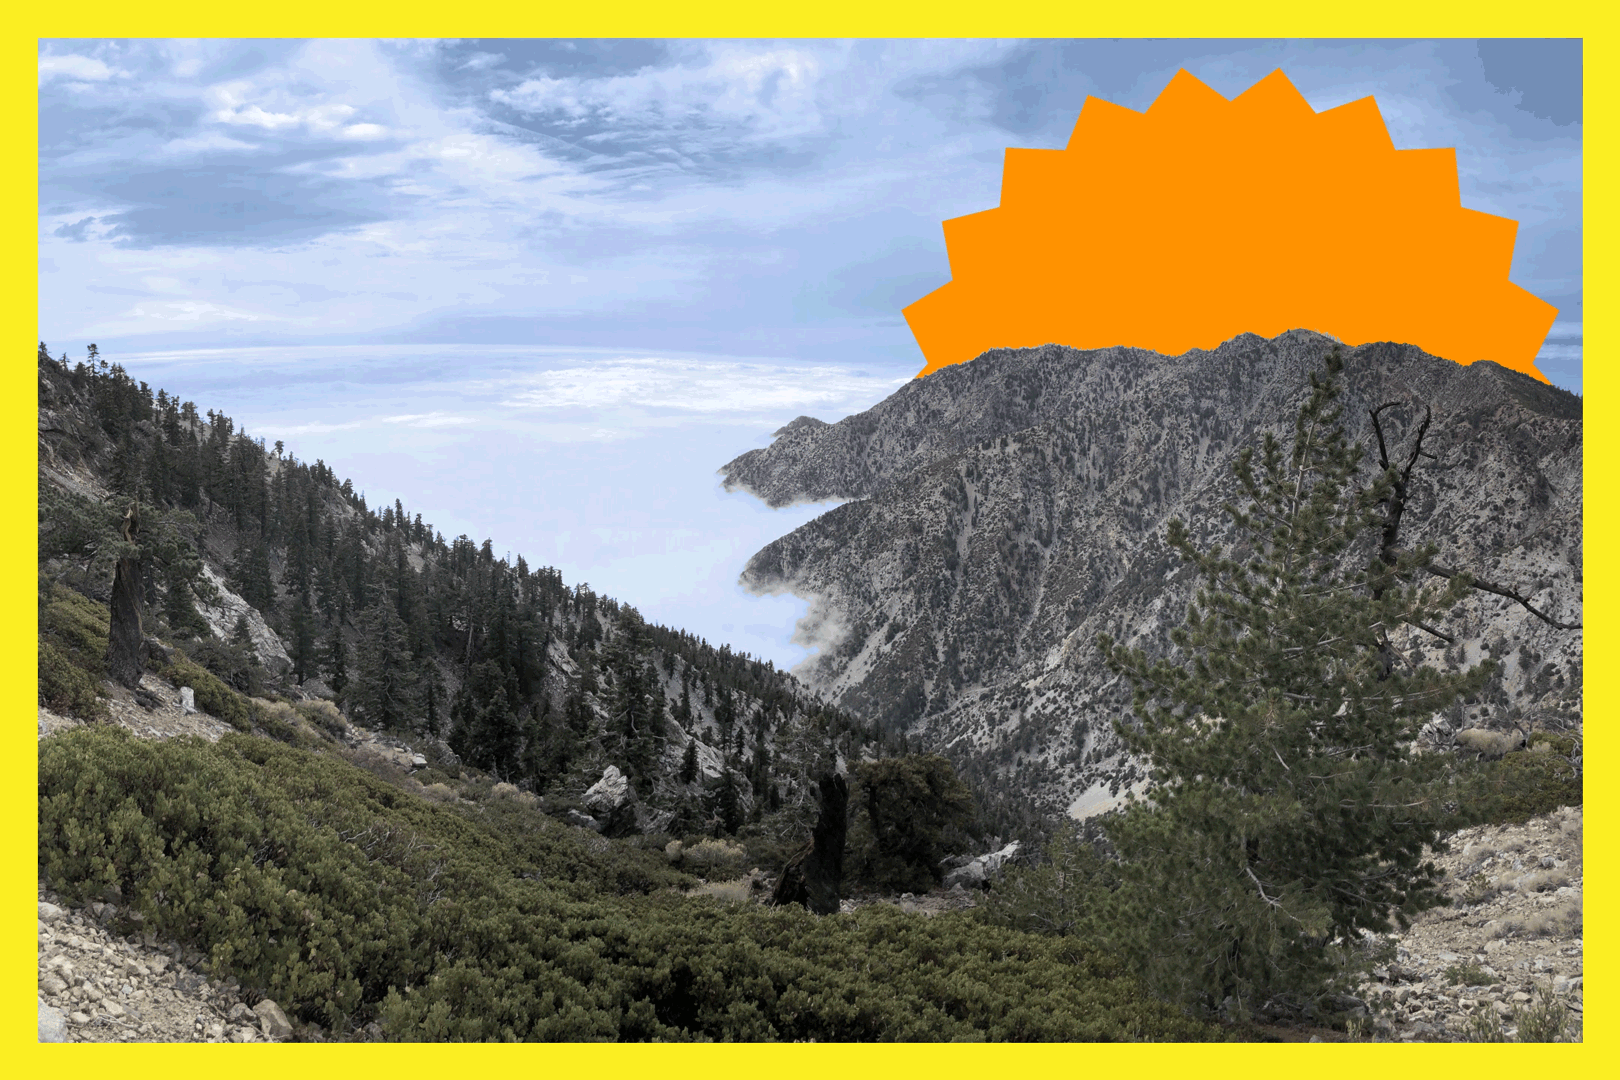 A view from the trail to Cucamonga Peak. A mountain stretches out into a valley of fog with cloudy blue skies above.